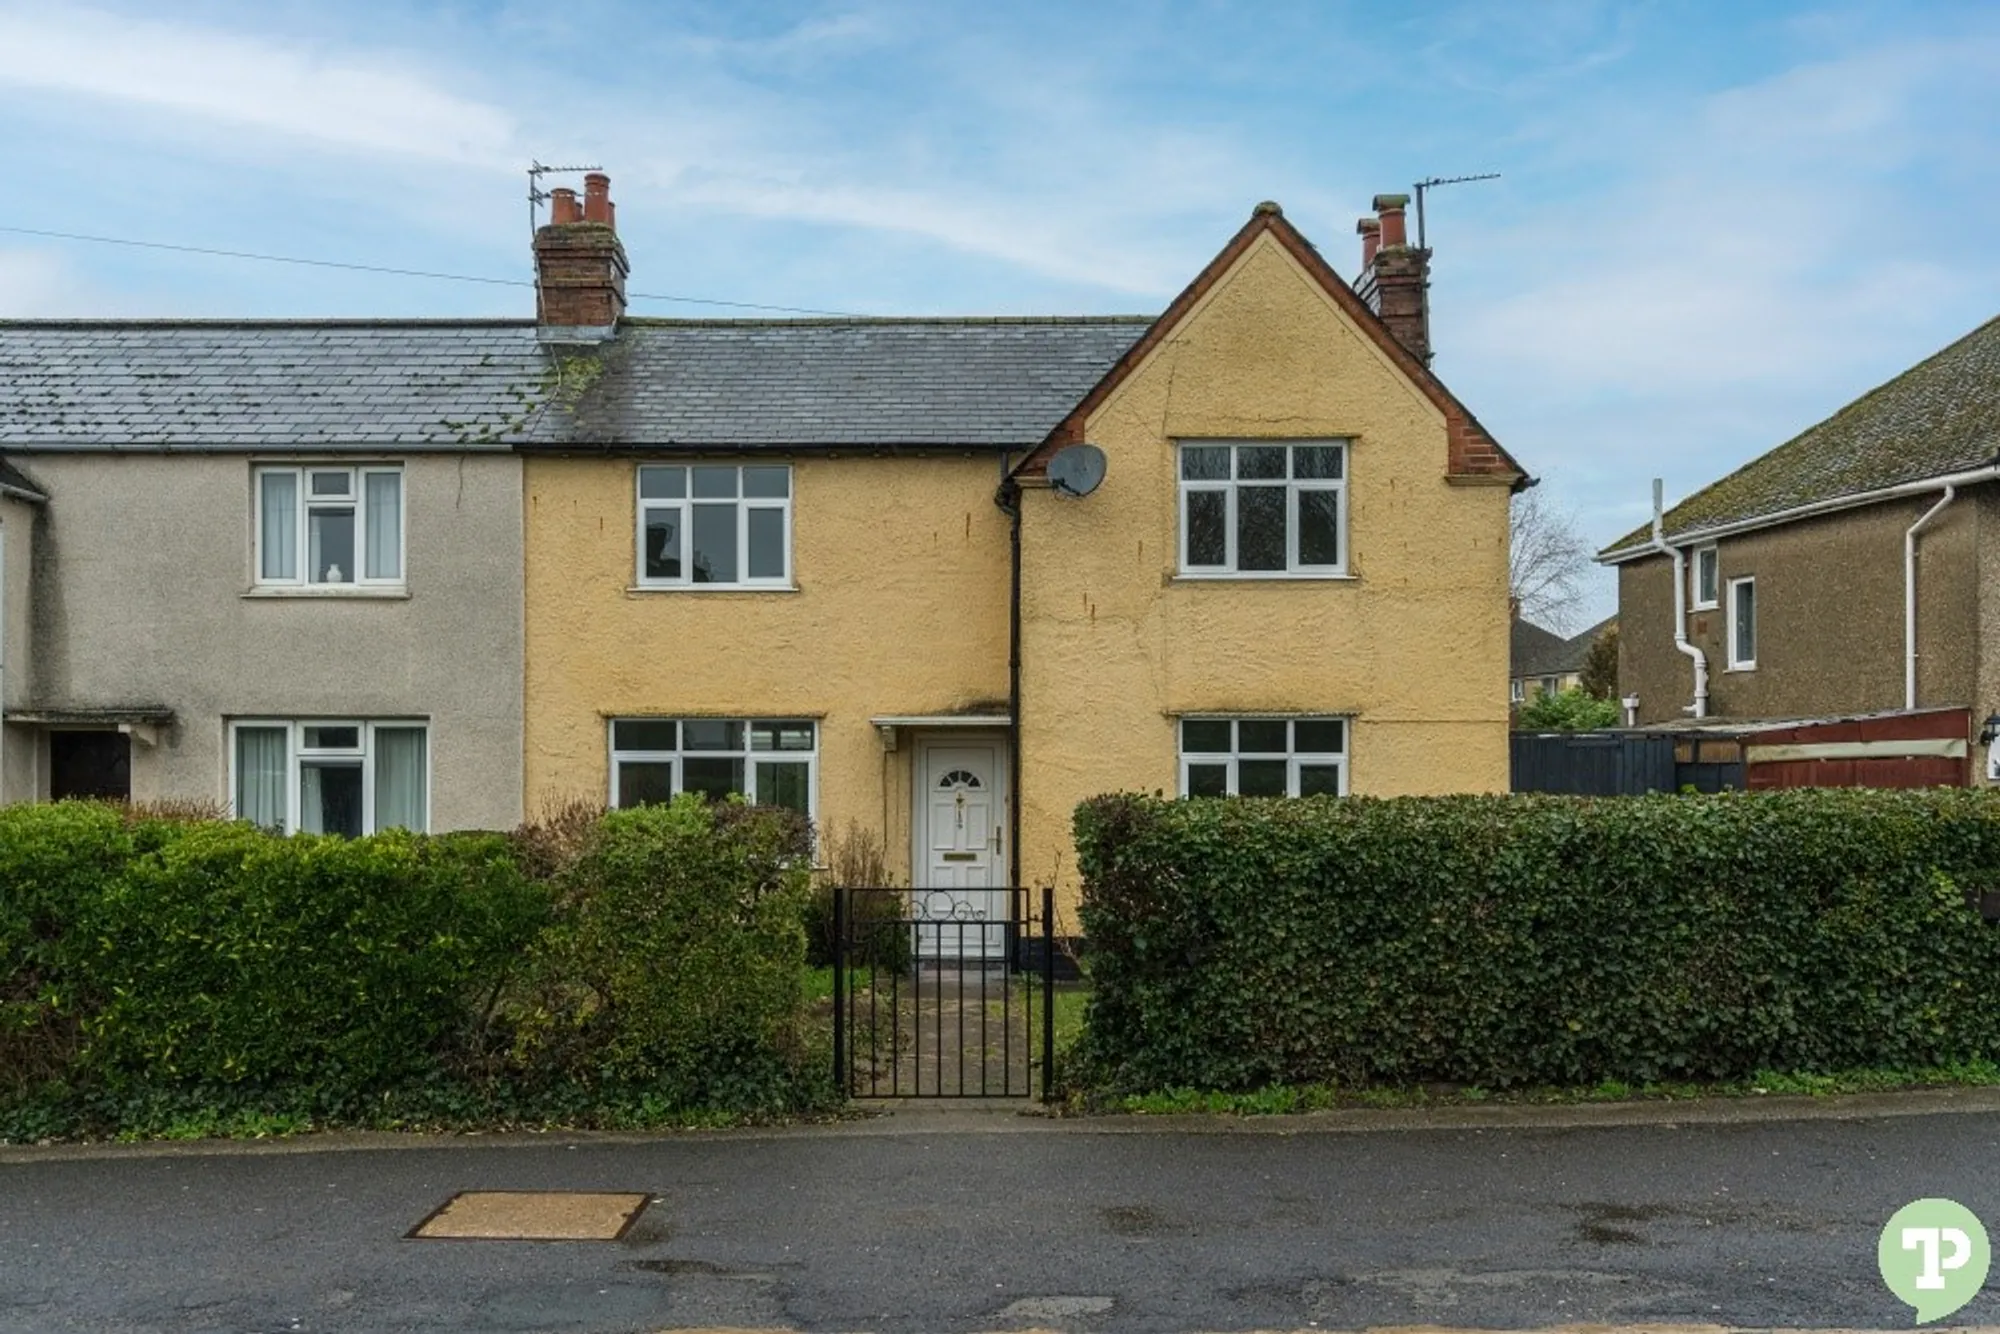 3 bed semi-detached house to rent in Cowley Road, Oxford - Property Image 1